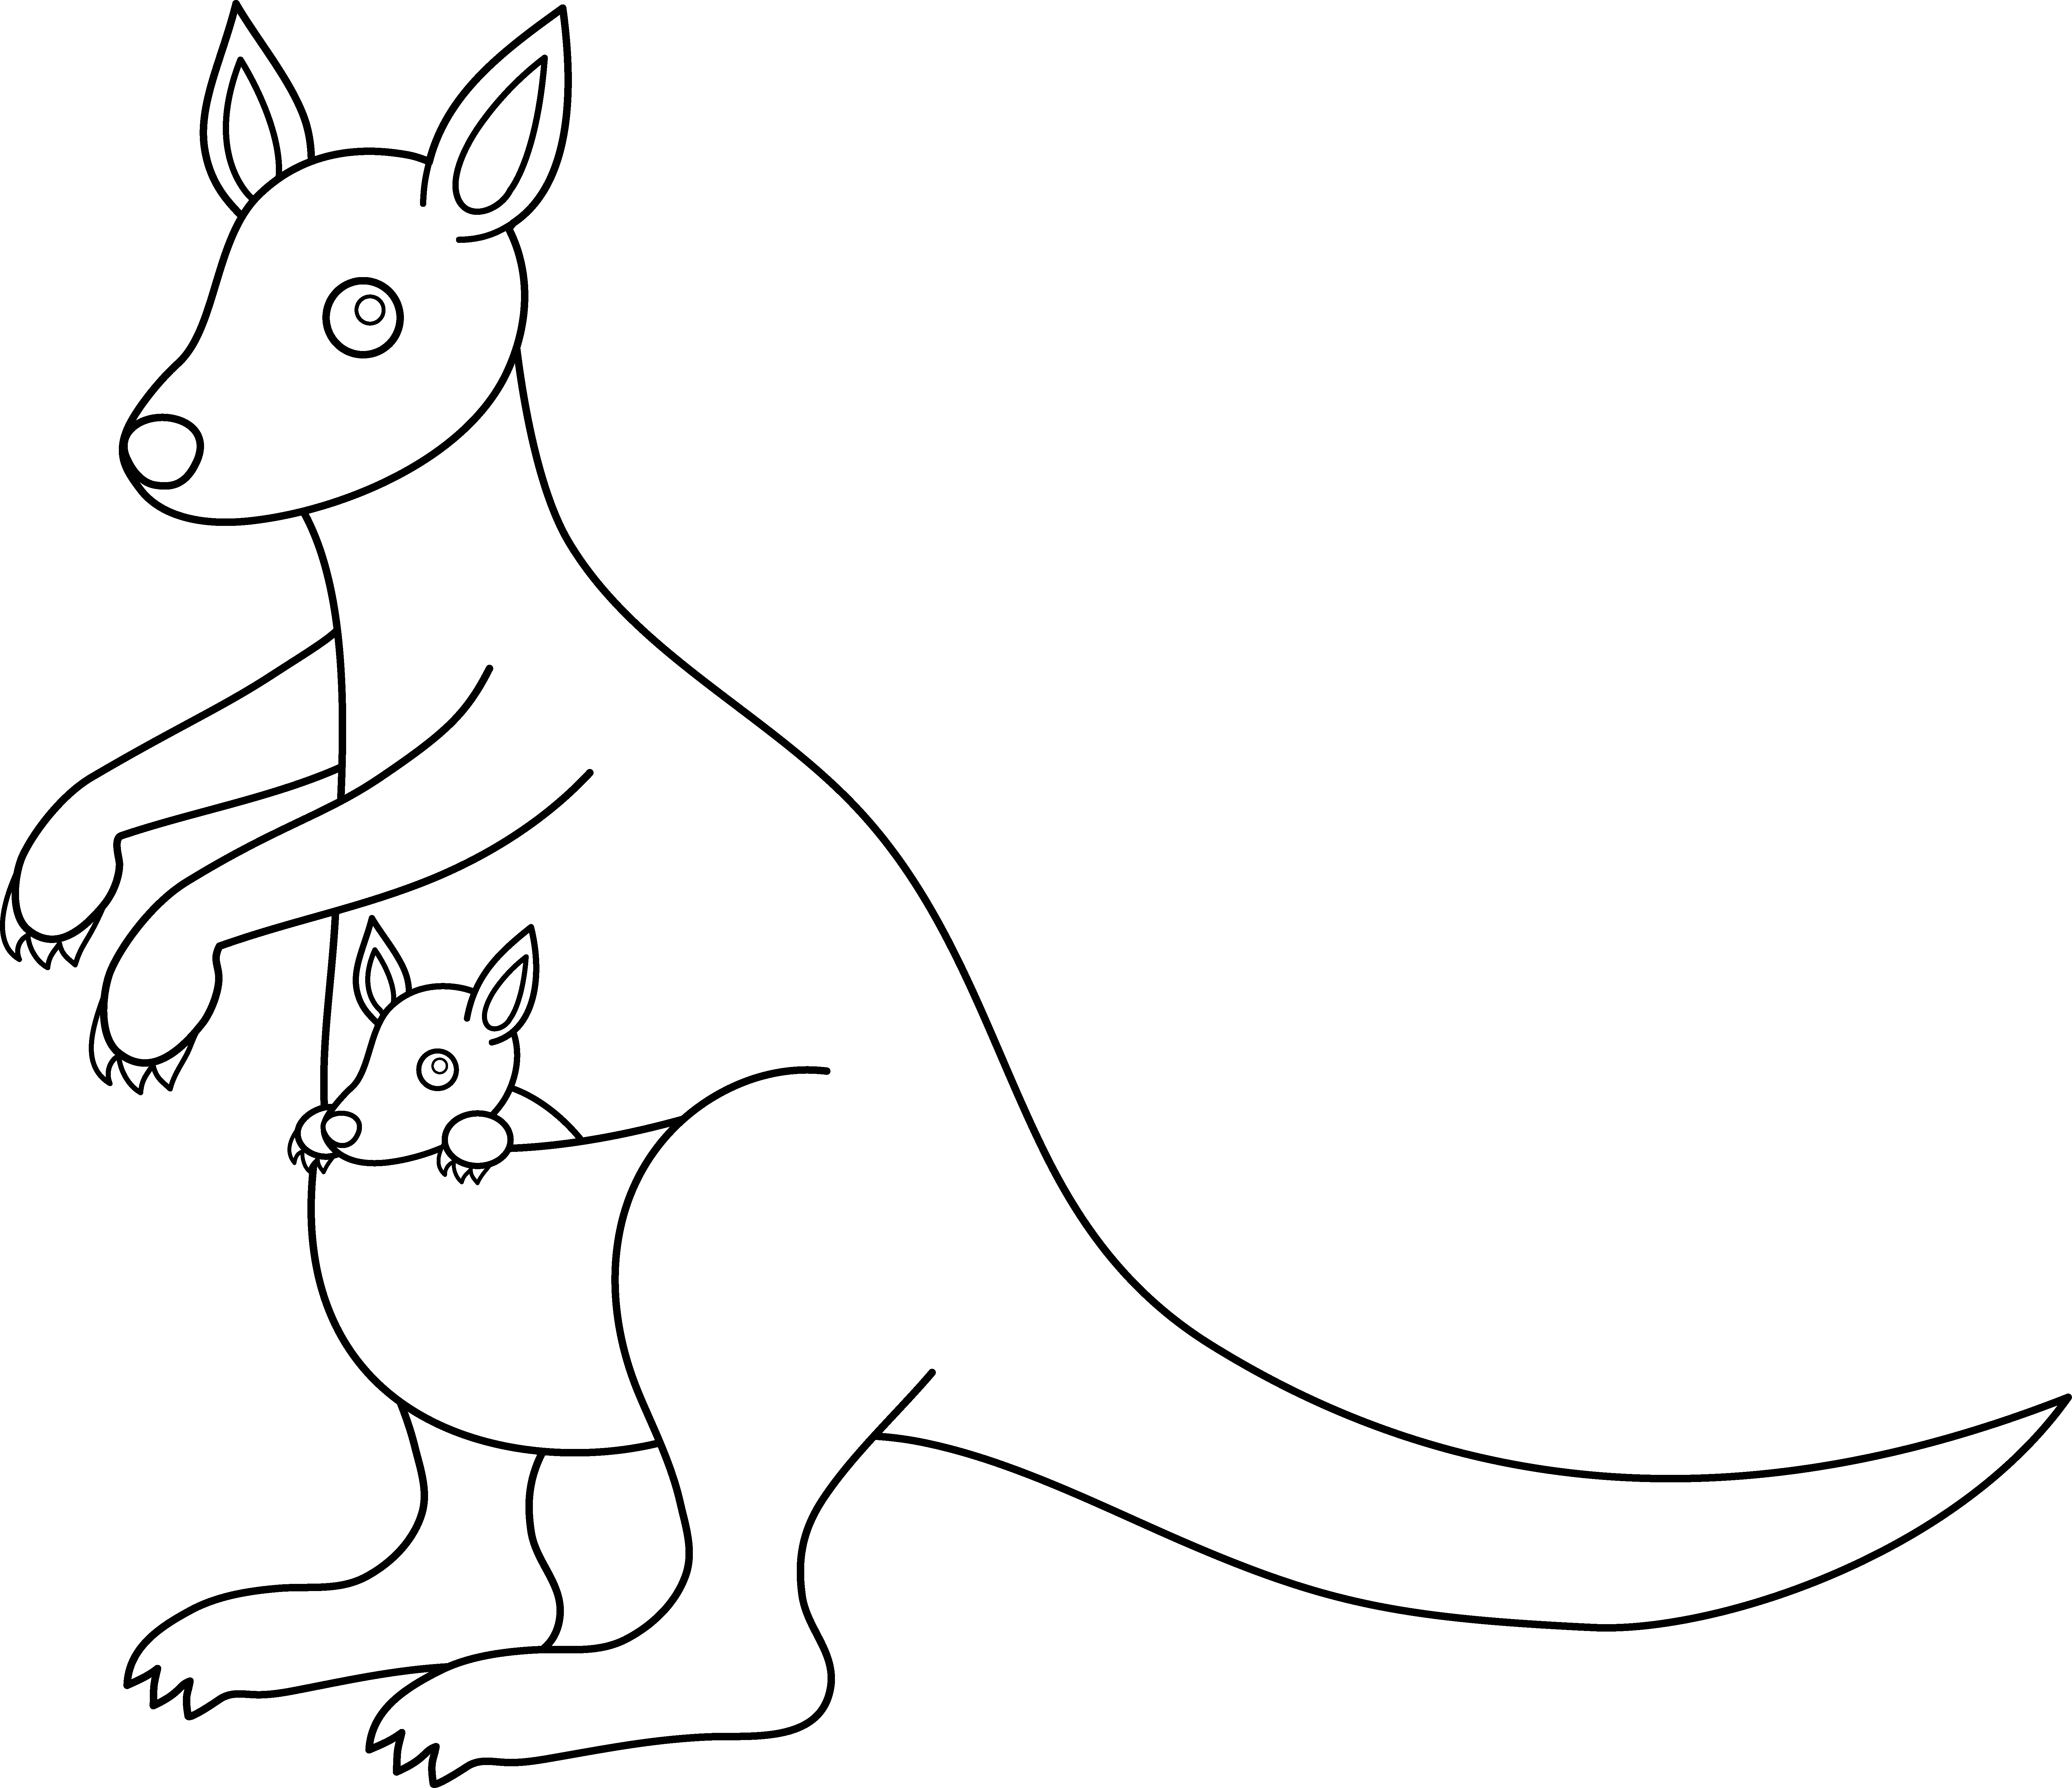 Outline clipart kangaroo. Colorable design free clip